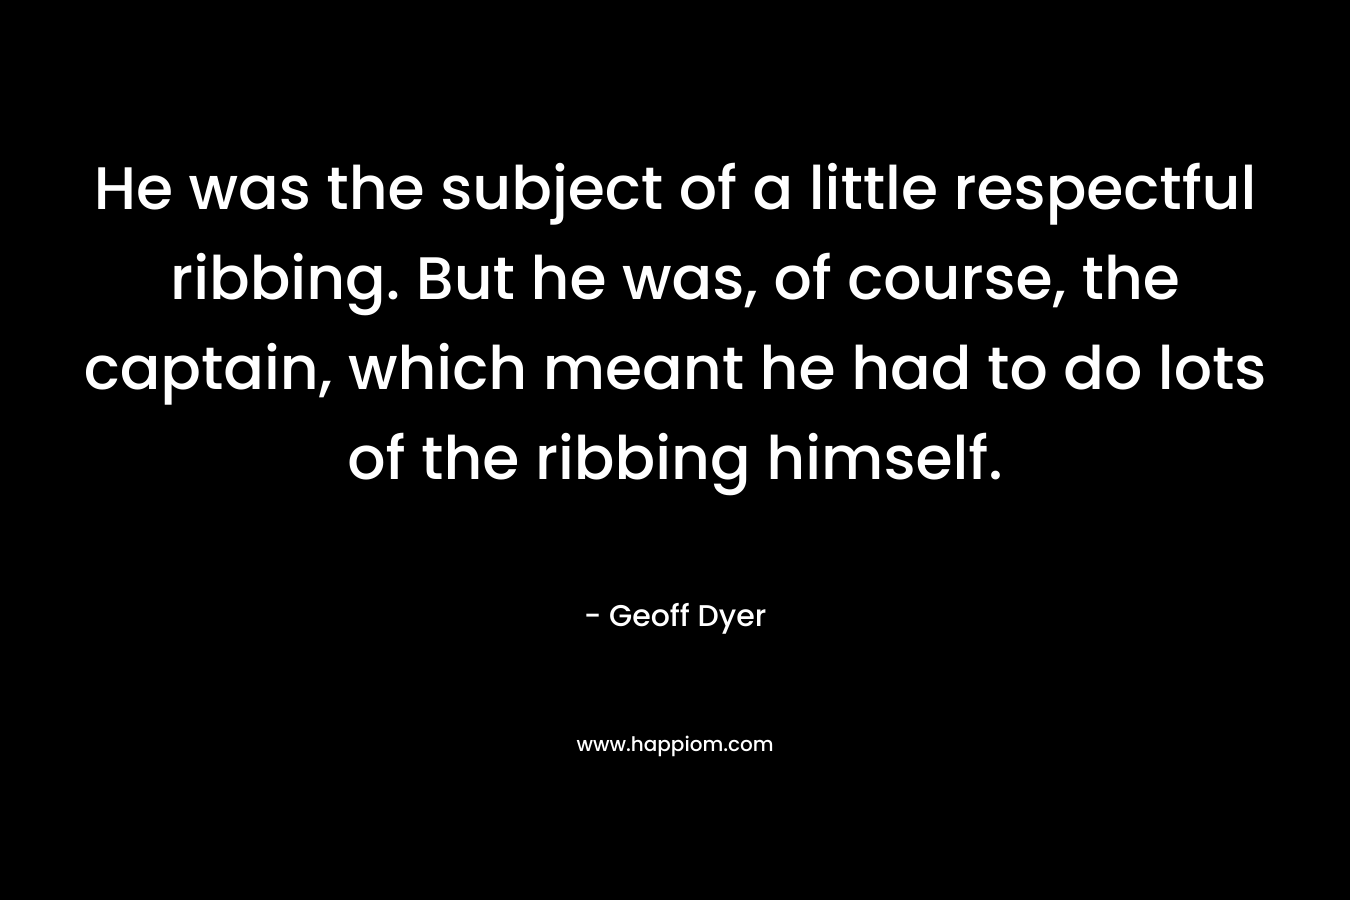 He was the subject of a little respectful ribbing. But he was, of course, the captain, which meant he had to do lots of the ribbing himself. – Geoff Dyer